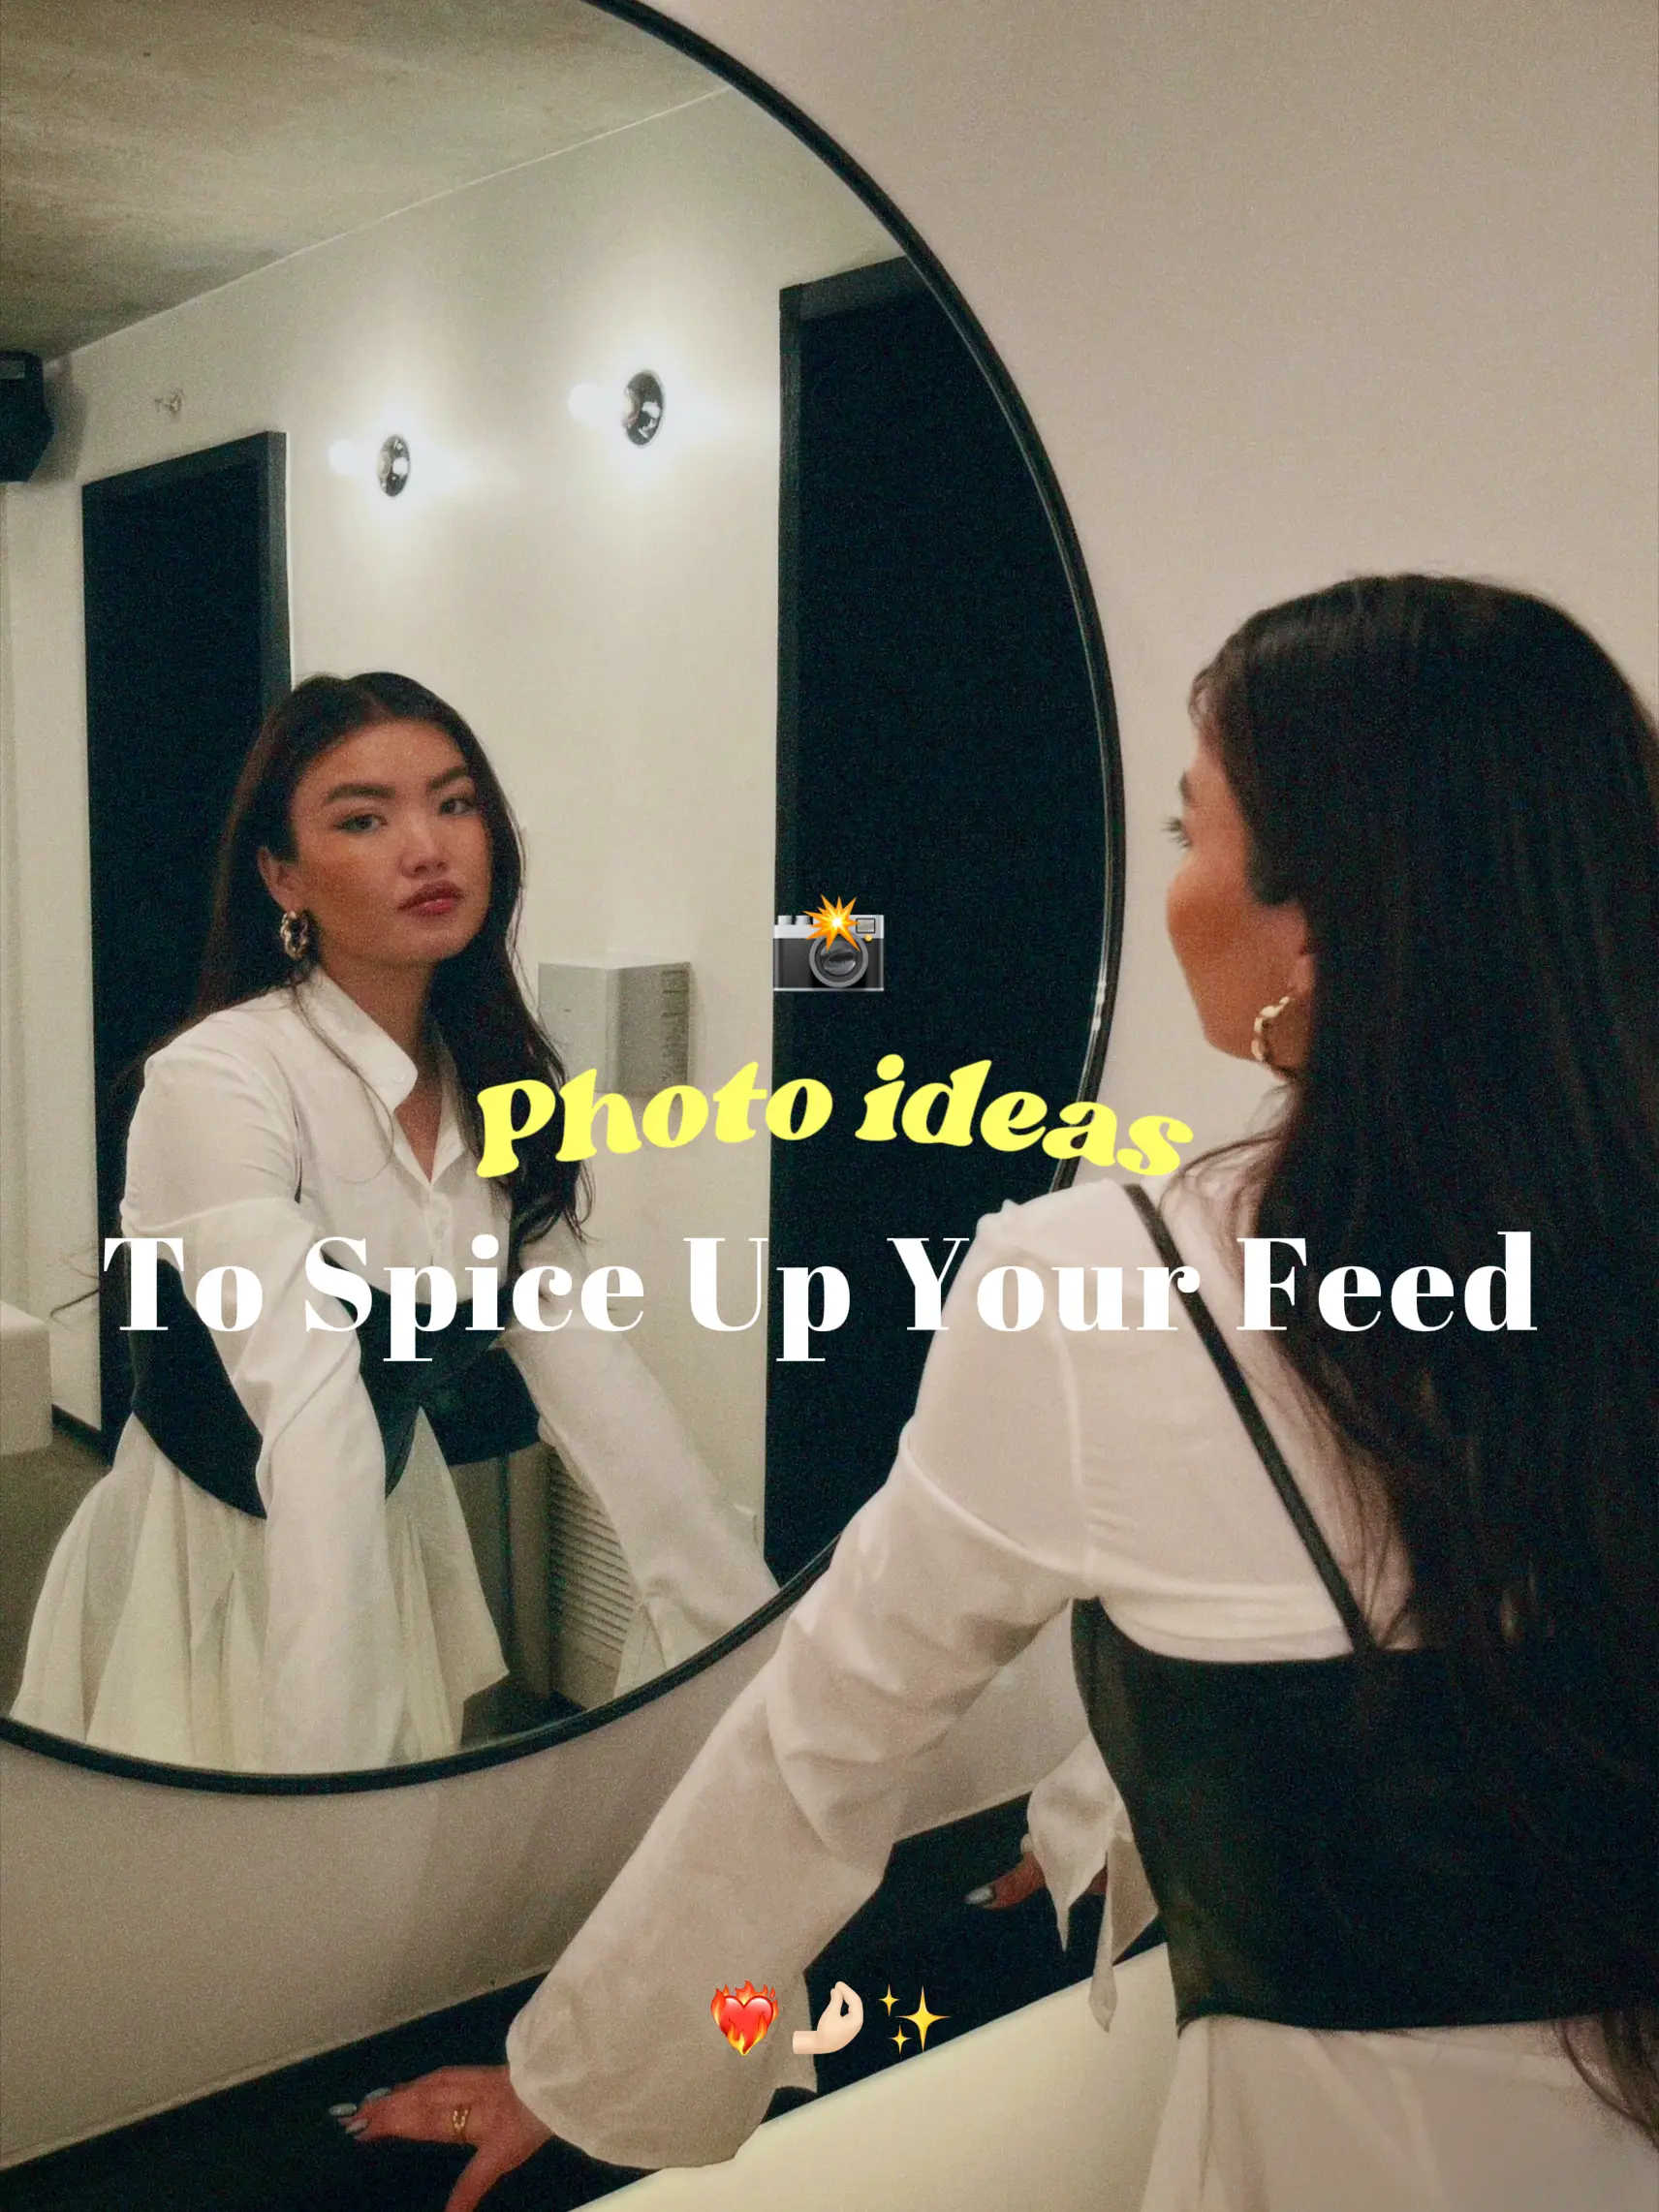 Be ready to spice up that feed! ❤️‍🔥's images